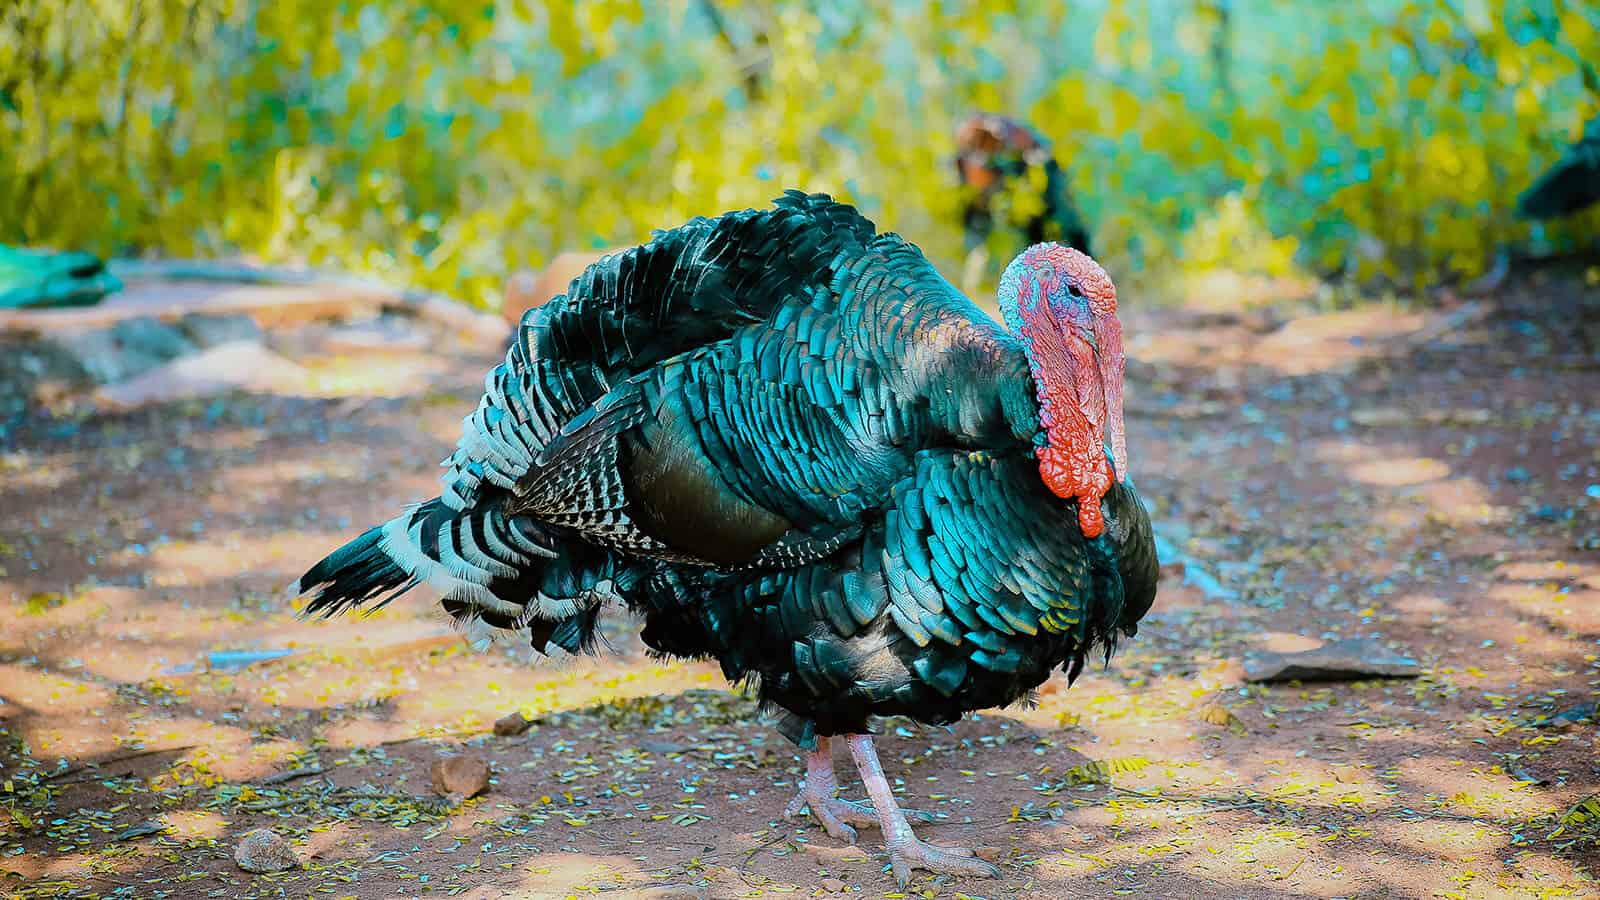 Turkey Hunting 101-What You Need to Go Turkey Hunting